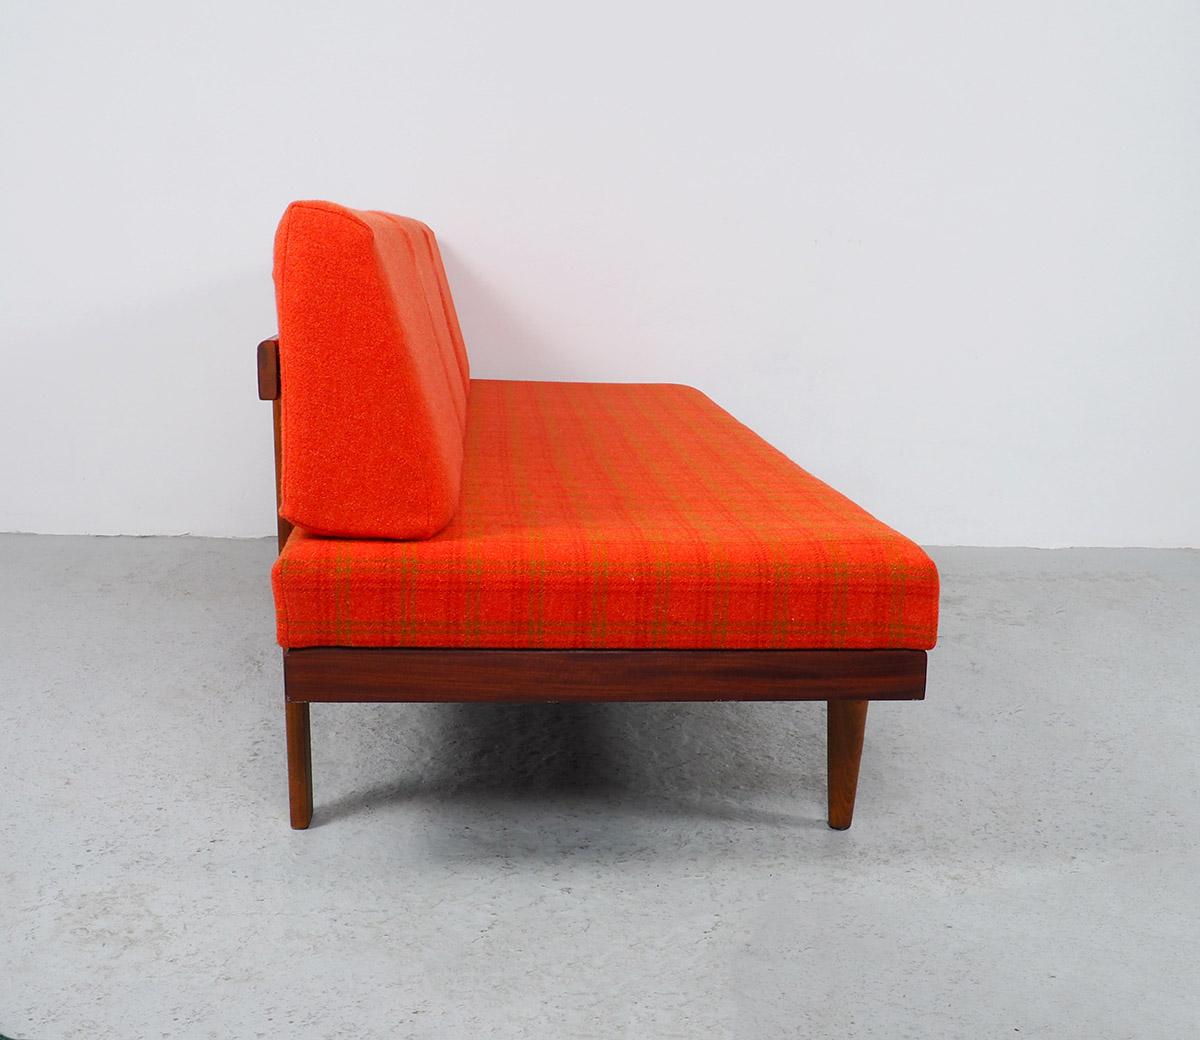 Mid-20th Century Svane Daybed in Orange Fabric by Ingmar Relling for Ekornes, 1960s